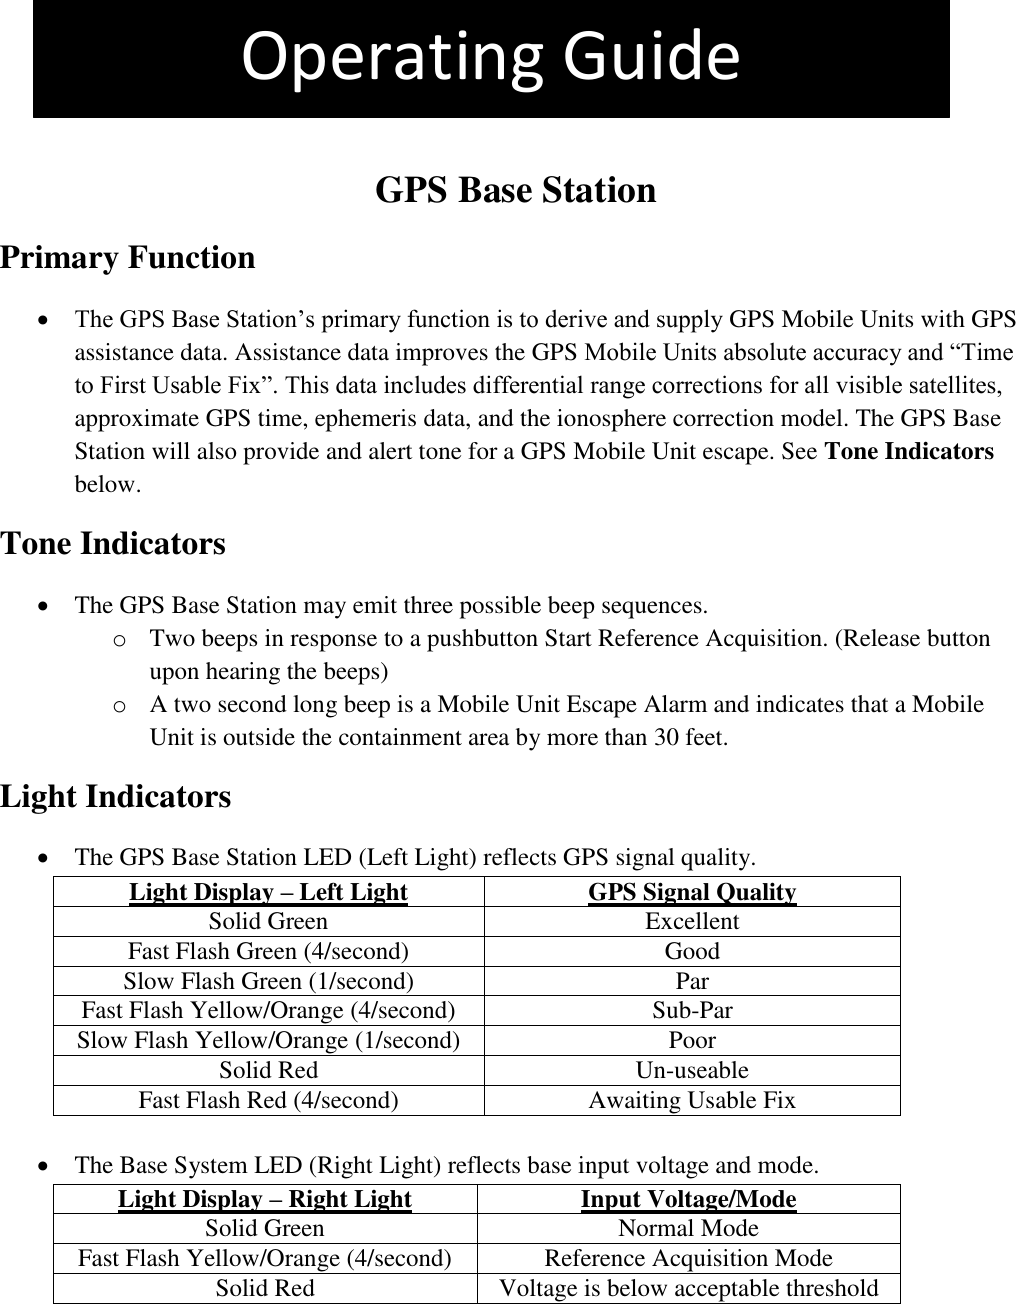 The pet is more than 4 feet outside the containment area. This is an Out +4 Violation   GPS Base Station Primary Function  The GPS Base Station’s primary function is to derive and supply GPS Mobile Units with GPS assistance data. Assistance data improves the GPS Mobile Units absolute accuracy and “Time to First Usable Fix”. This data includes differential range corrections for all visible satellites, approximate GPS time, ephemeris data, and the ionosphere correction model. The GPS Base Station will also provide and alert tone for a GPS Mobile Unit escape. See Tone Indicators below. Tone Indicators  The GPS Base Station may emit three possible beep sequences. o Two beeps in response to a pushbutton Start Reference Acquisition. (Release button upon hearing the beeps) o A two second long beep is a Mobile Unit Escape Alarm and indicates that a Mobile Unit is outside the containment area by more than 30 feet.  Light Indicators   The GPS Base Station LED (Left Light) reflects GPS signal quality. Light Display – Left Light GPS Signal Quality Solid Green Excellent Fast Flash Green (4/second) Good Slow Flash Green (1/second) Par Fast Flash Yellow/Orange (4/second) Sub-Par Slow Flash Yellow/Orange (1/second) Poor Solid Red Un-useable Fast Flash Red (4/second) Awaiting Usable Fix     The Base System LED (Right Light) reflects base input voltage and mode. Light Display – Right Light Input Voltage/Mode Solid Green Normal Mode Fast Flash Yellow/Orange (4/second) Reference Acquisition Mode Solid Red Voltage is below acceptable threshold    Operating Guide 